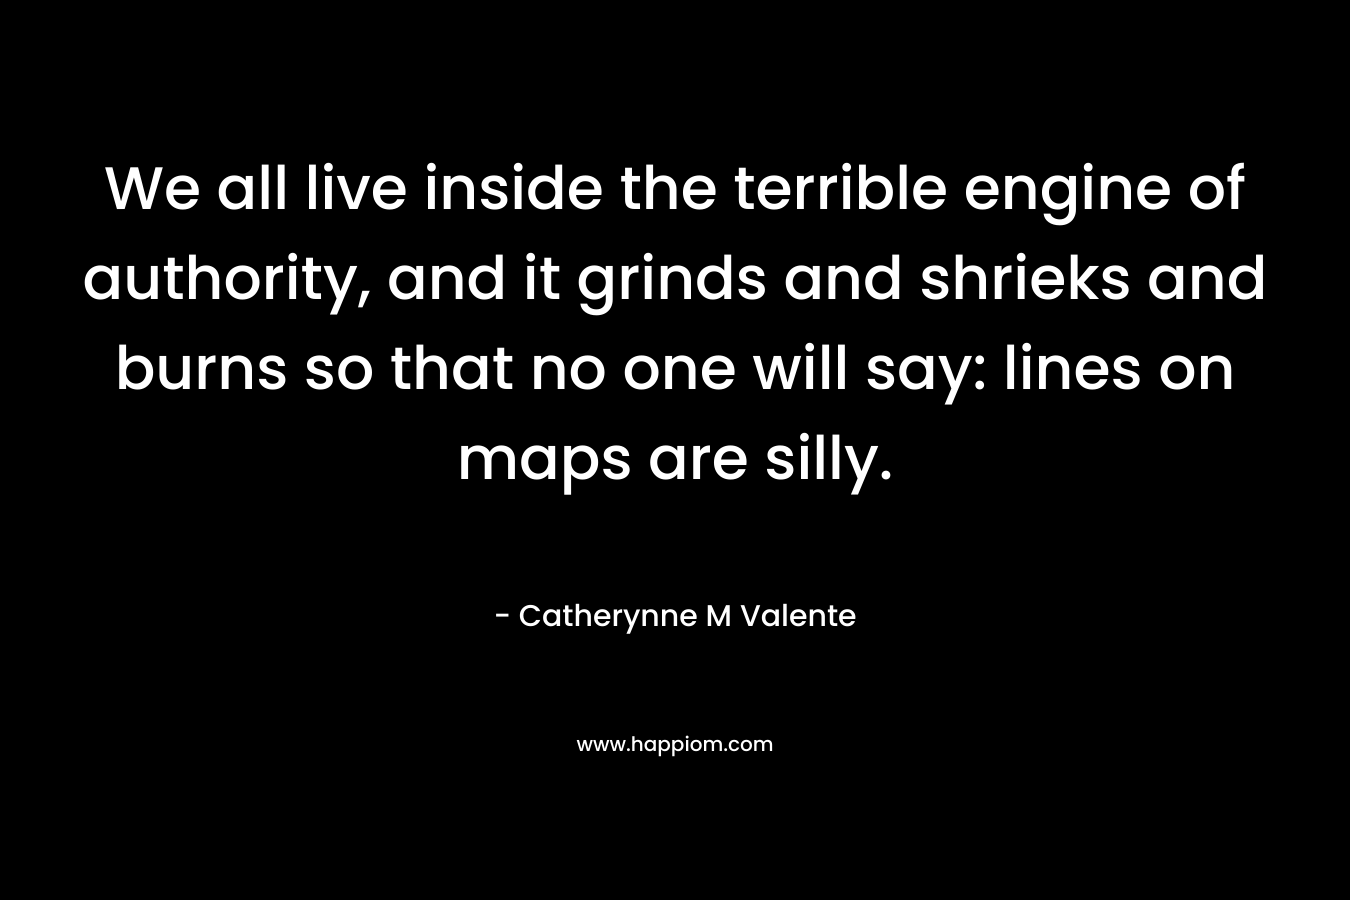 We all live inside the terrible engine of authority, and it grinds and shrieks and burns so that no one will say: lines on maps are silly.